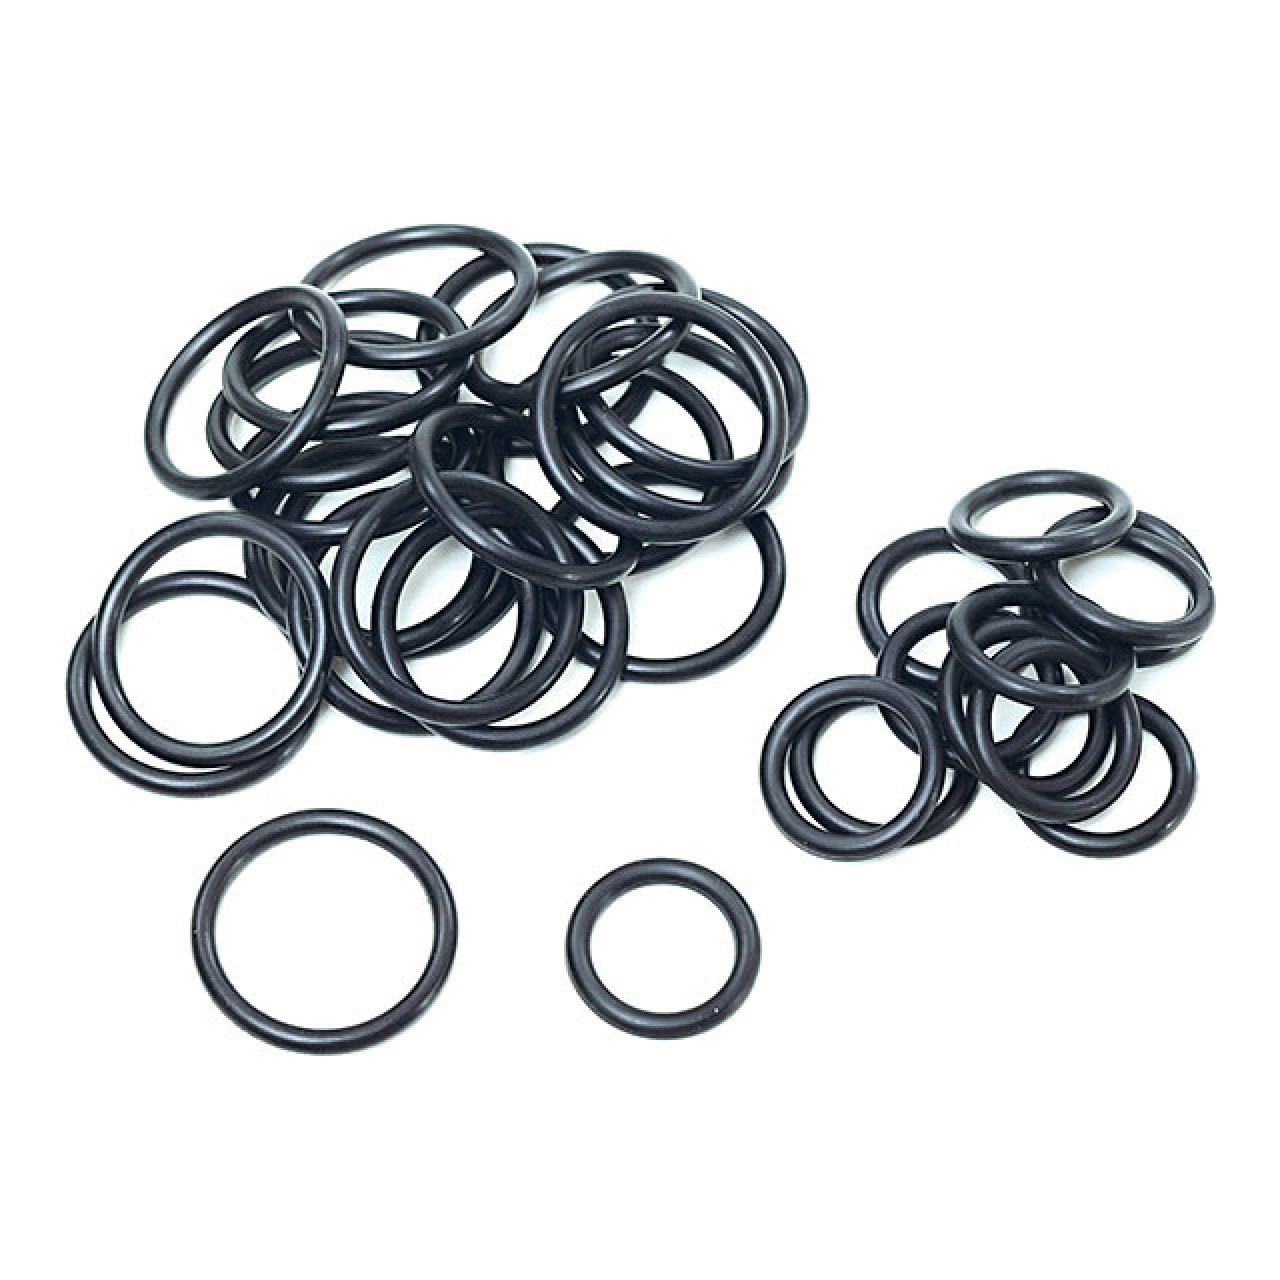 E1022018 Diesel Fuel Rubber O-ring E1022010 O Rings Insulation Gasket  Washer Seals For Denso Injector - Fuel Injector - AliExpress